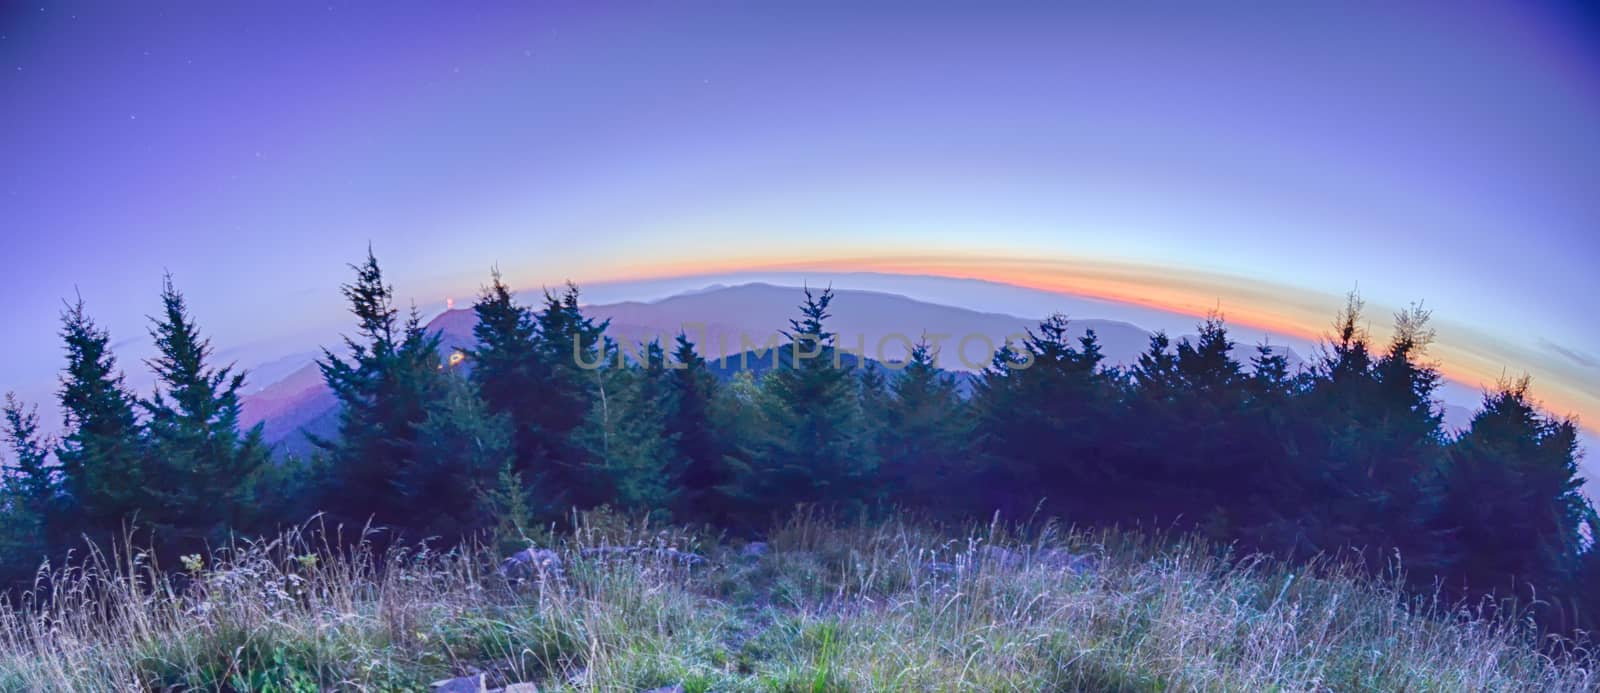 top of mount mitchell before sunset